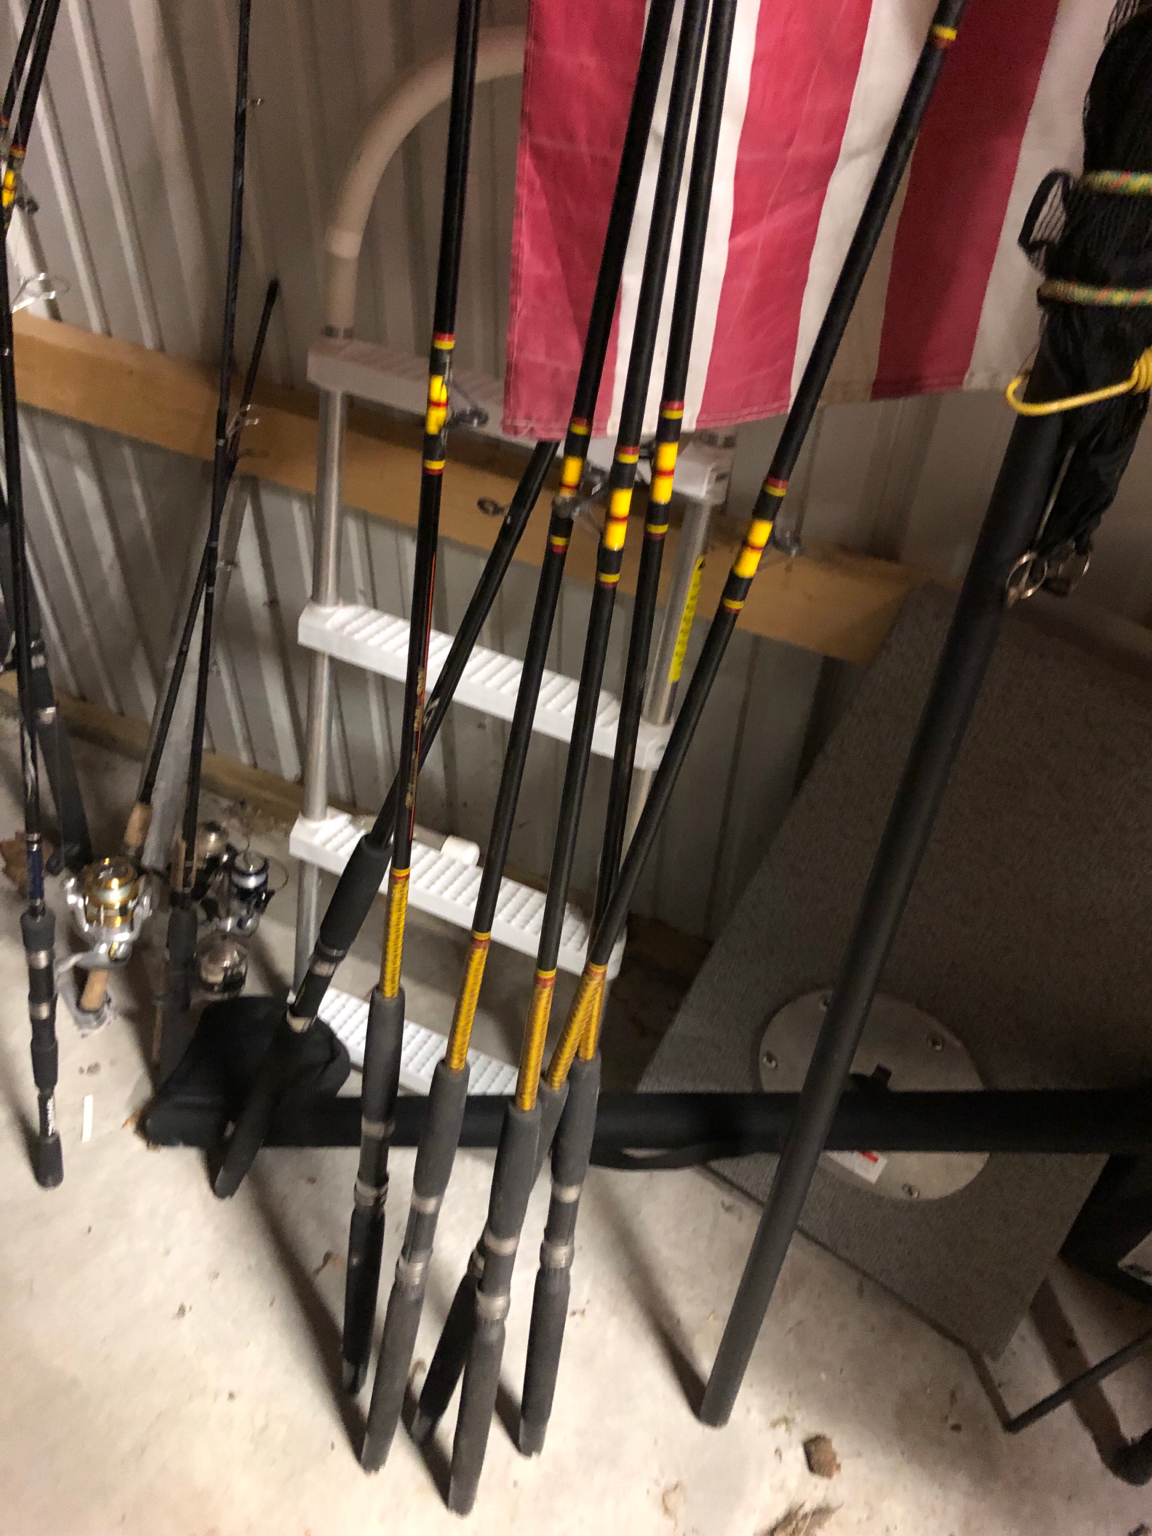 6 9' ugly stik trolling rods - Classifieds - Buy, Sell, Trade or Rent -  Lake Erie United - Walleye, Bass, Perch Fishing Forum